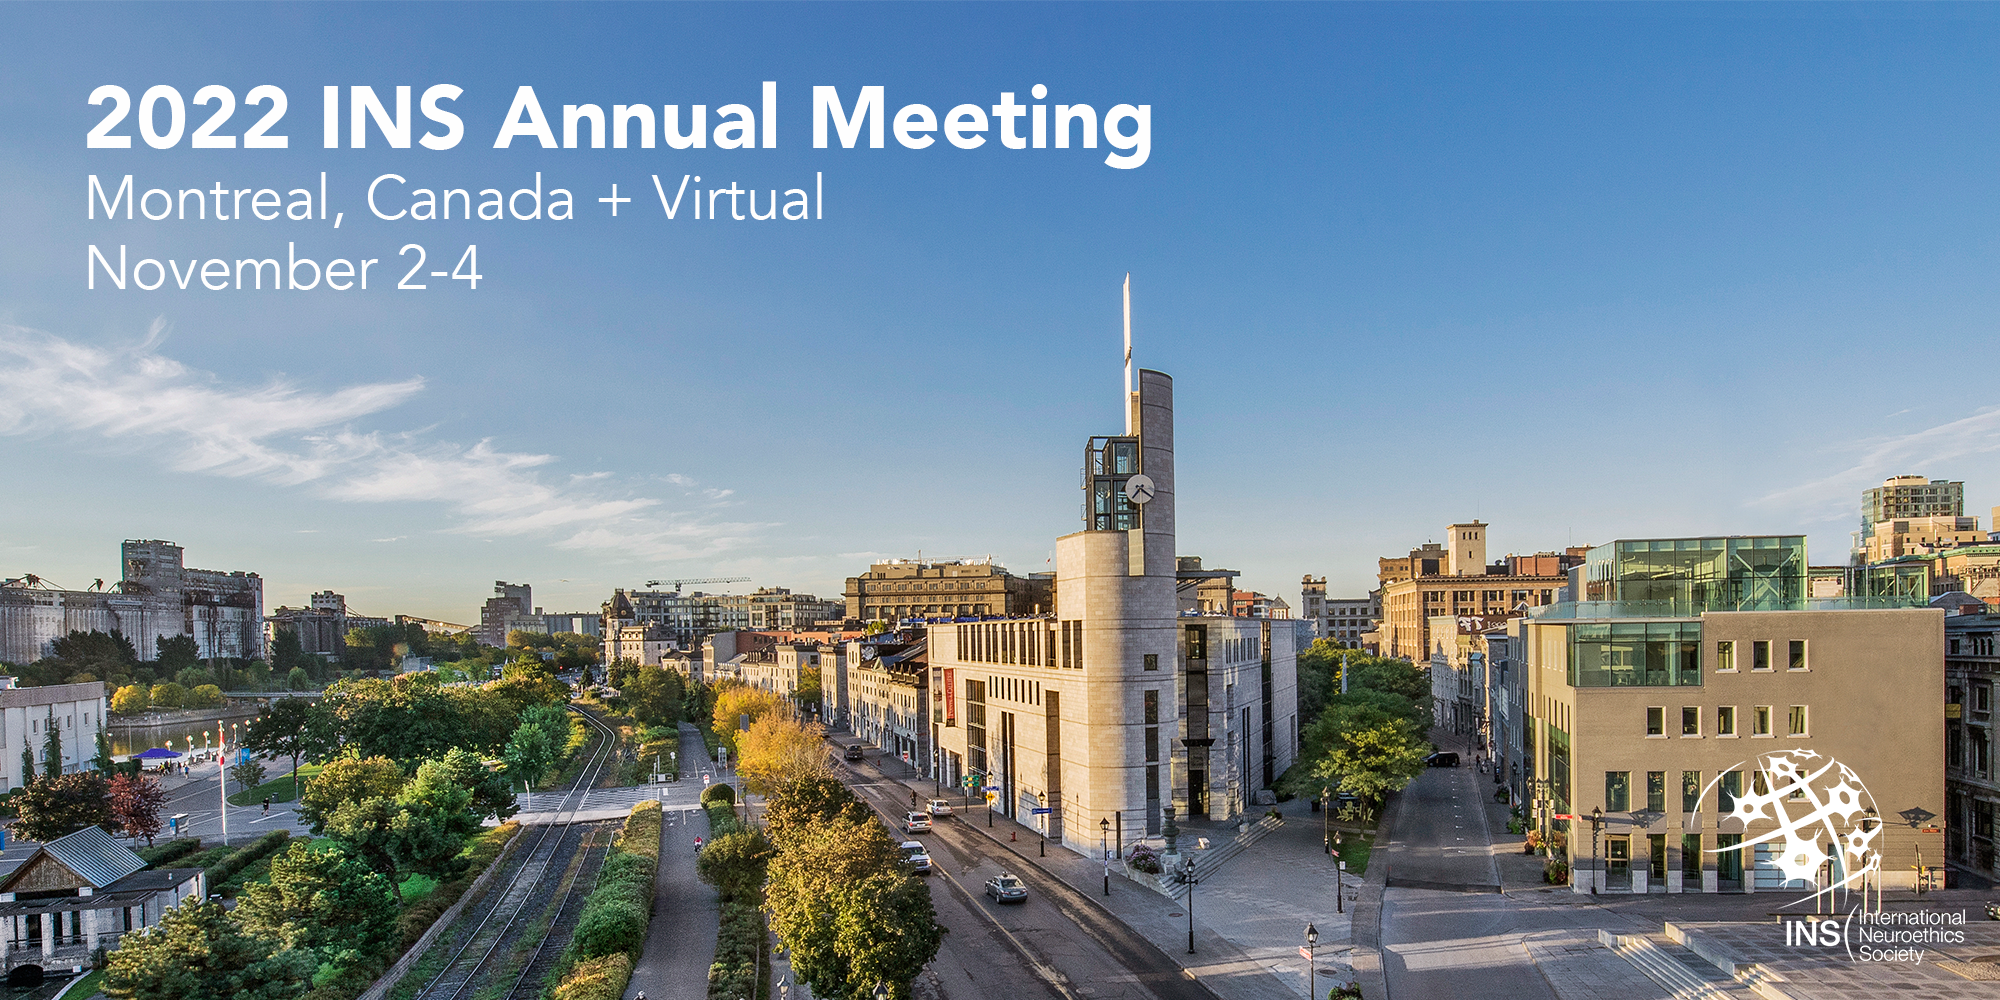 2022 INS Annual Meeting; Montreal, Canada + Virtual
November 2-4, 2022; Background with Montreal cityscape including road and railways